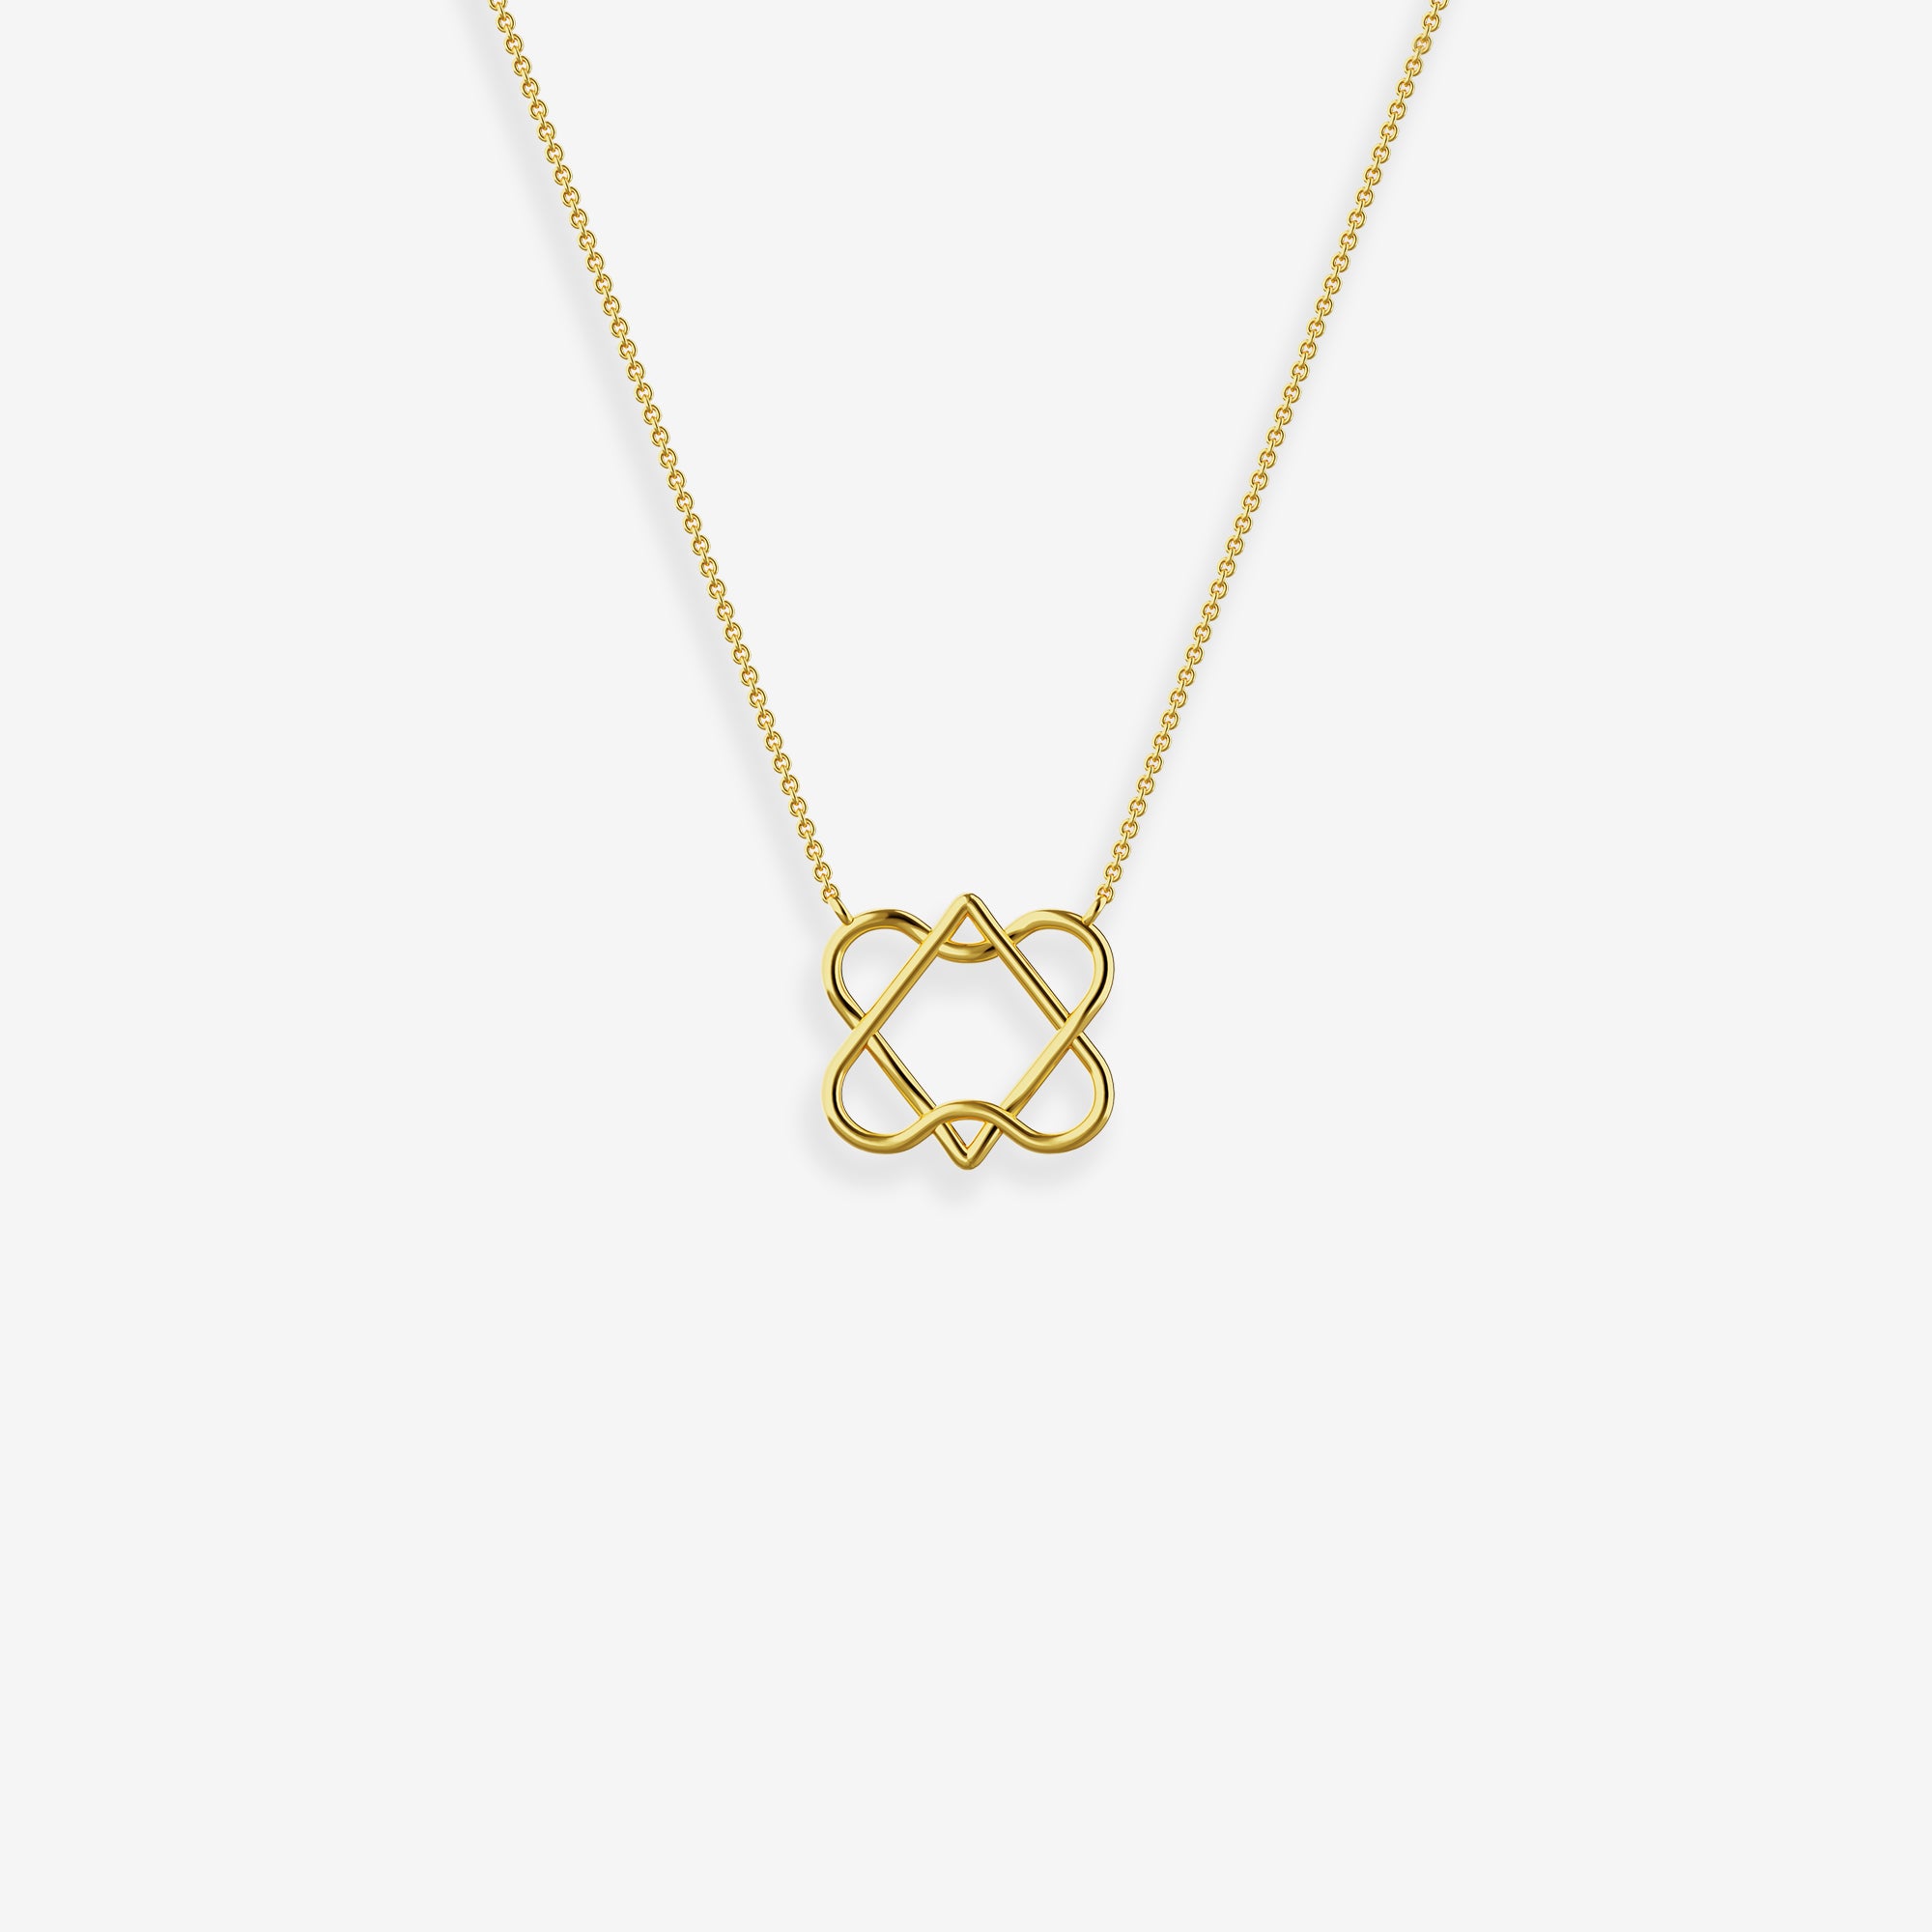 Classic Gold Heart of David Necklace